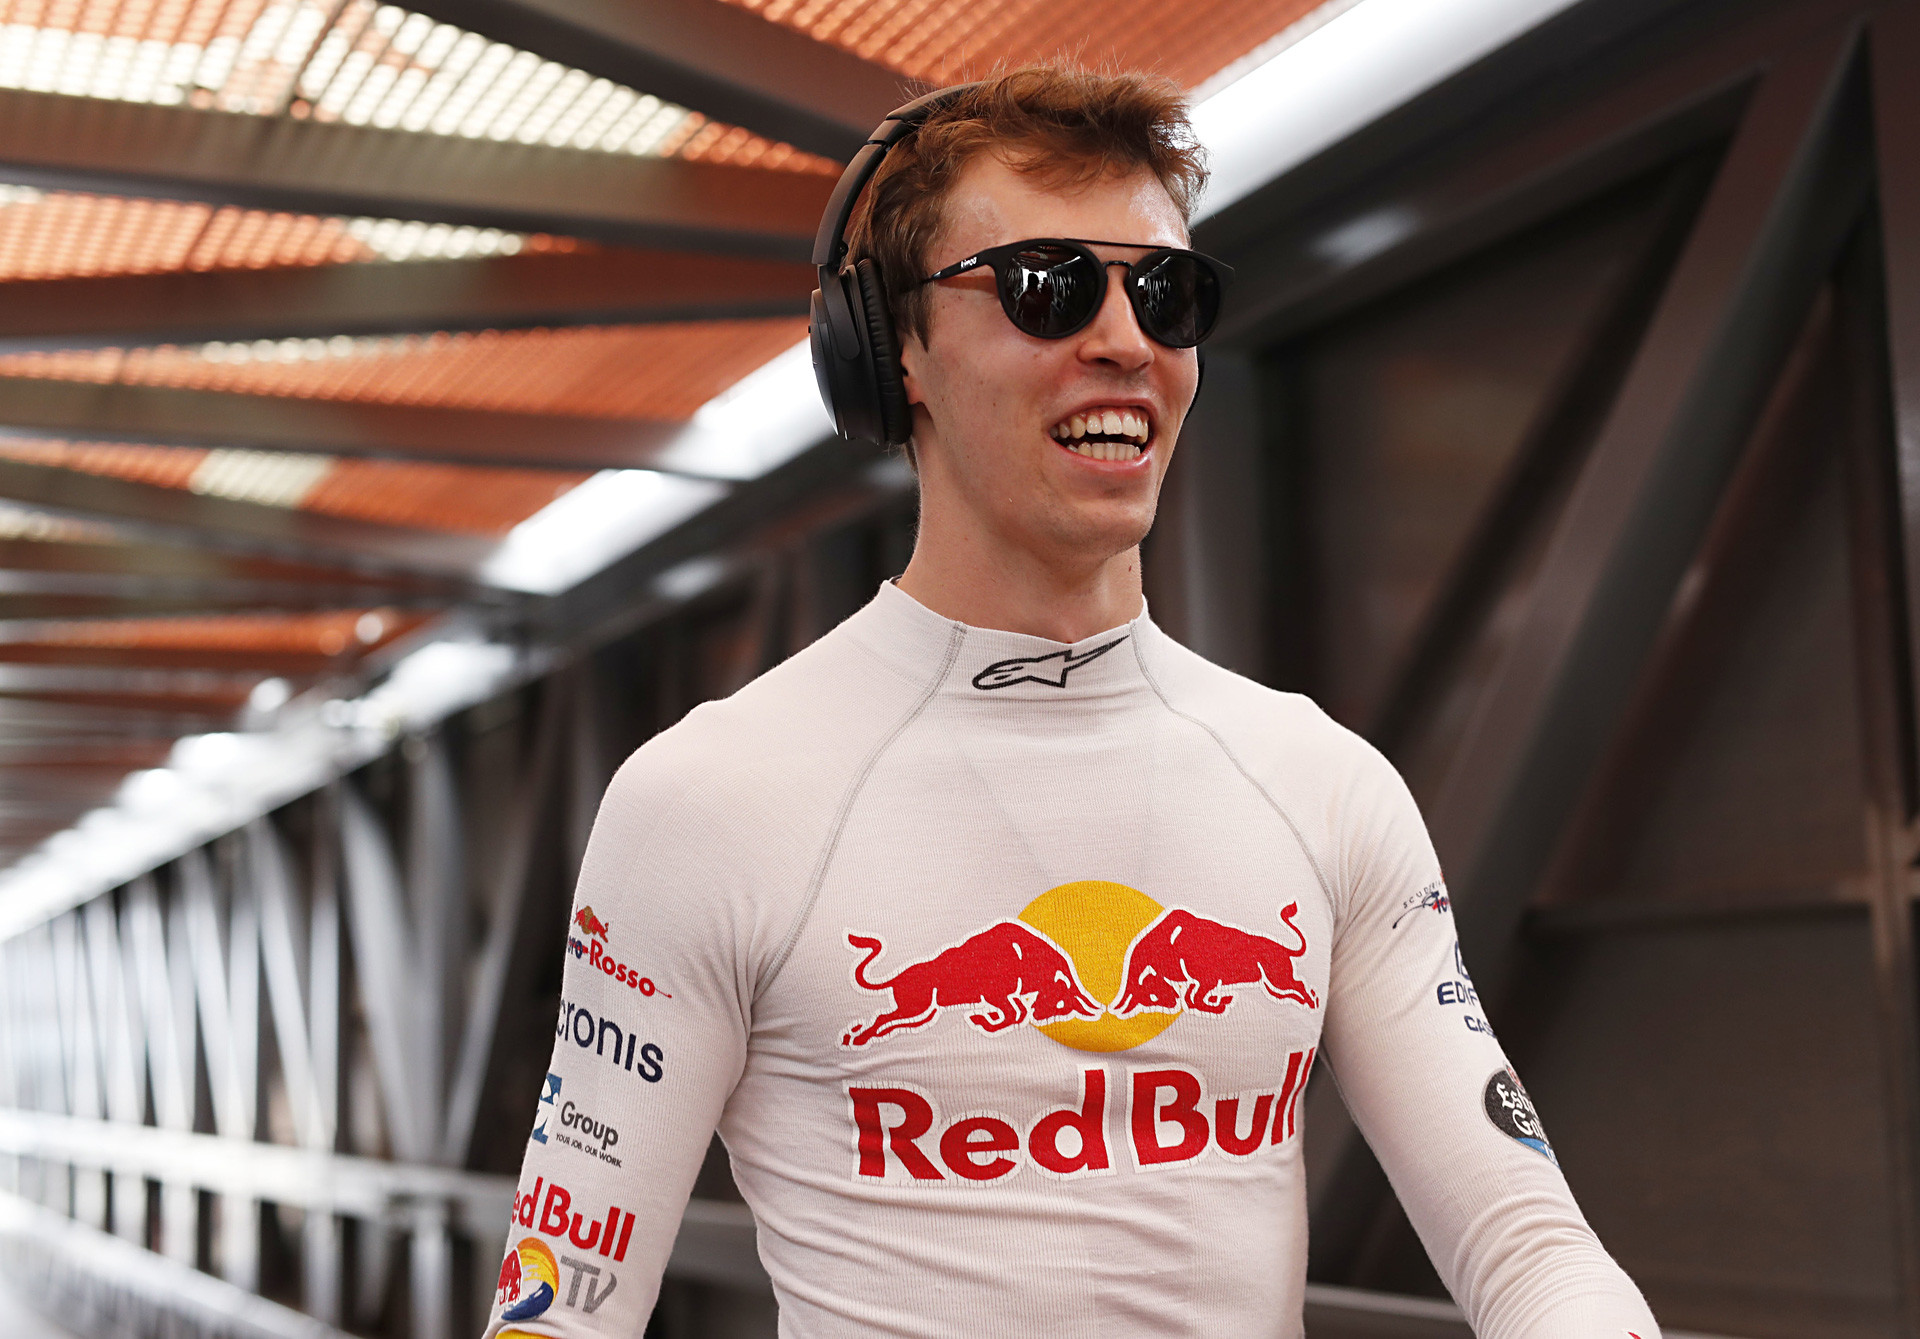 Daniil Kvyat, Sirotkin's predecessor in Formula One who used to drive for Red Bull and Toro Rosso teams, May 2017.